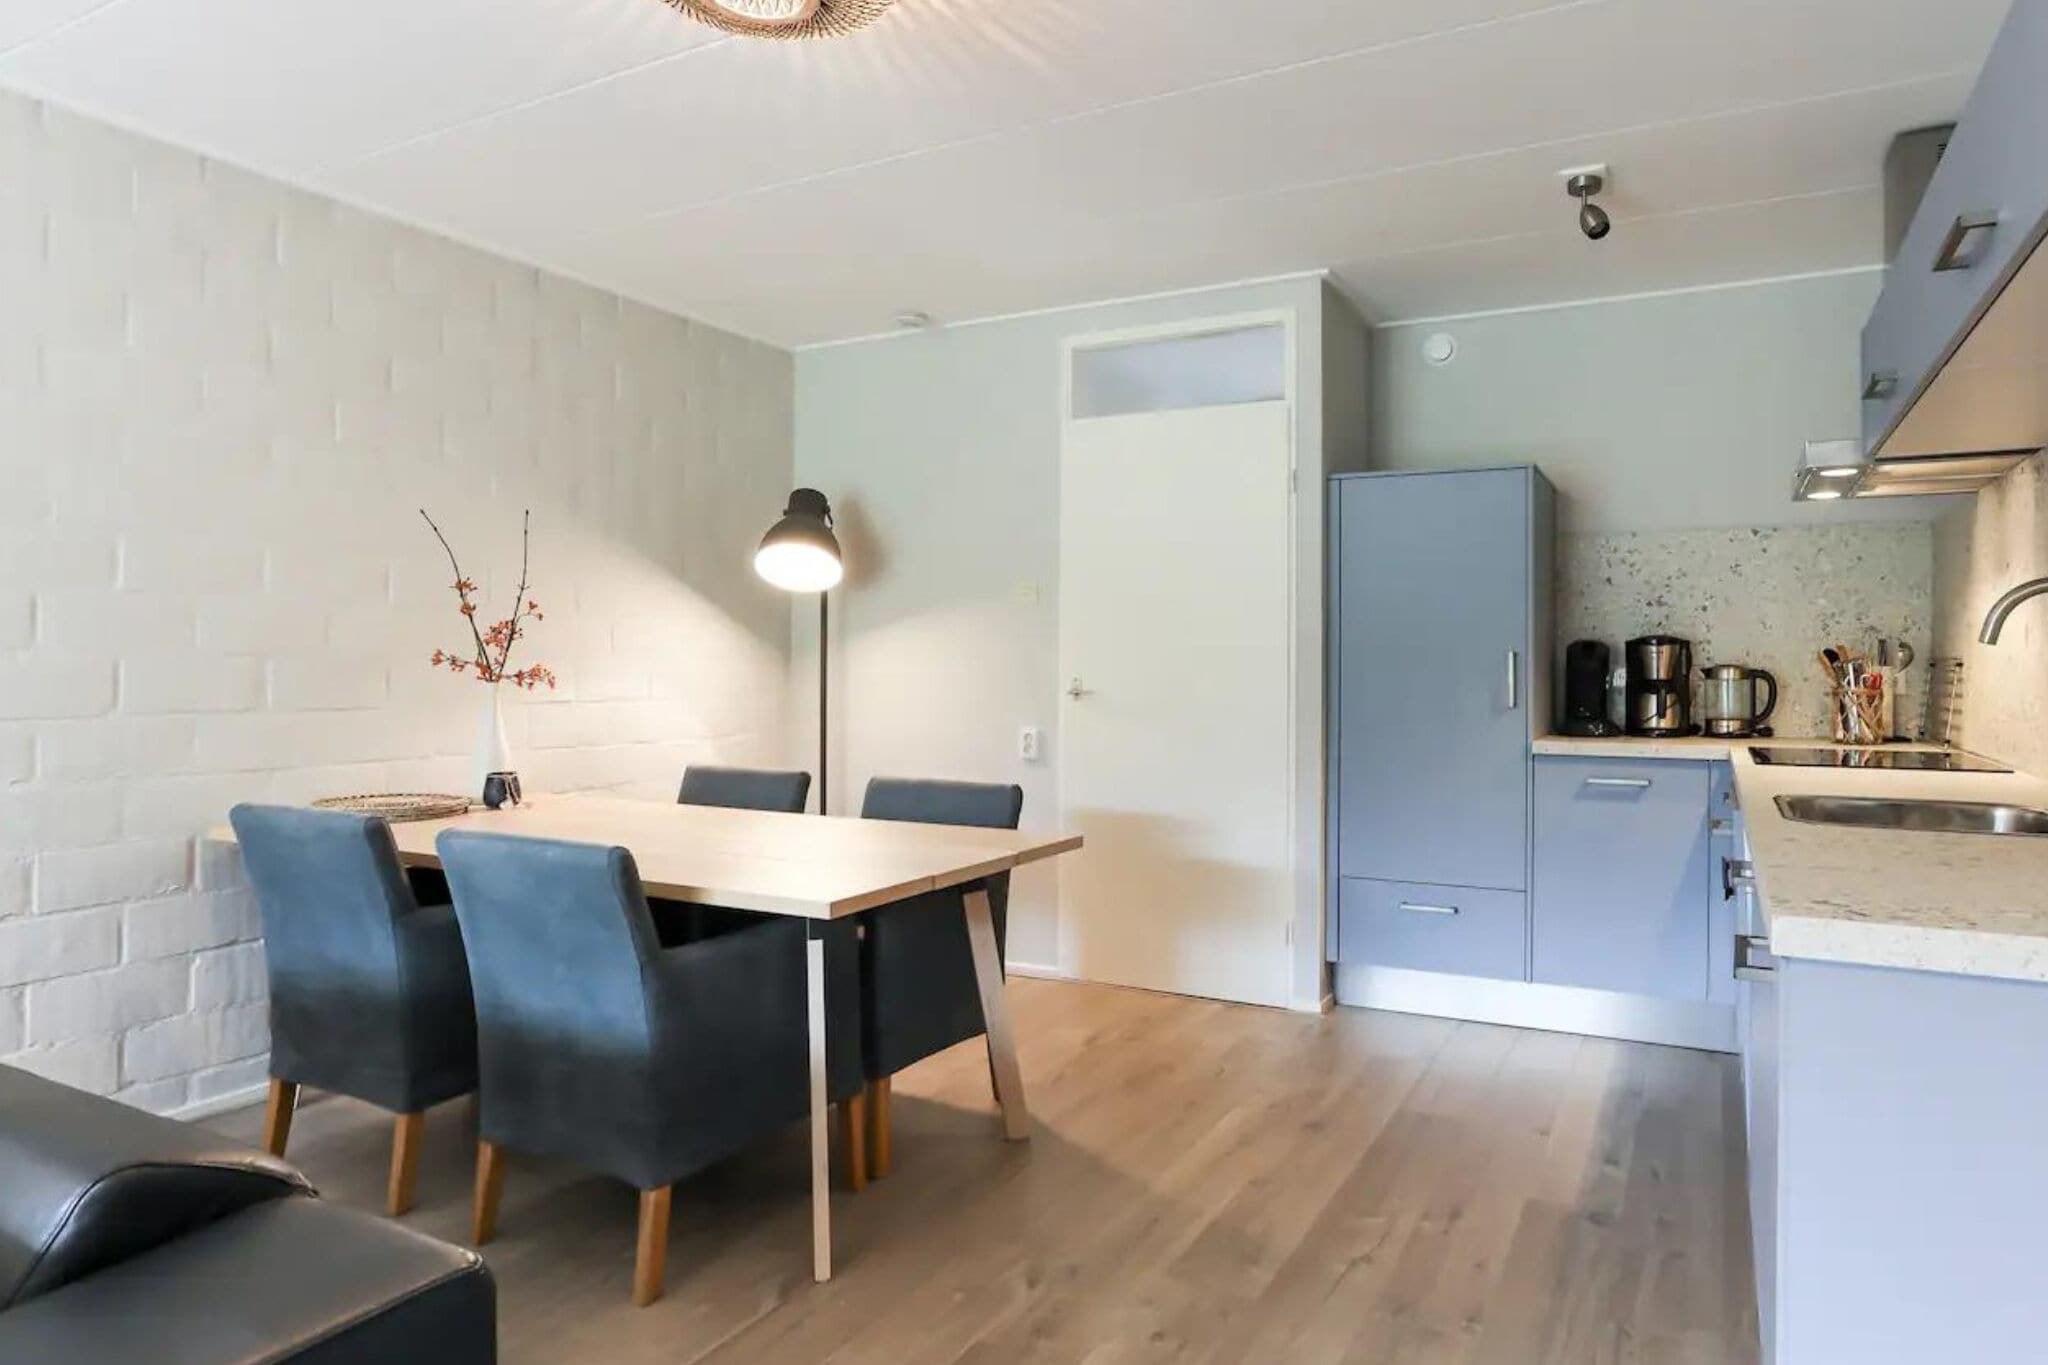 Apartment at the bottom of the dunes in Zoutelande